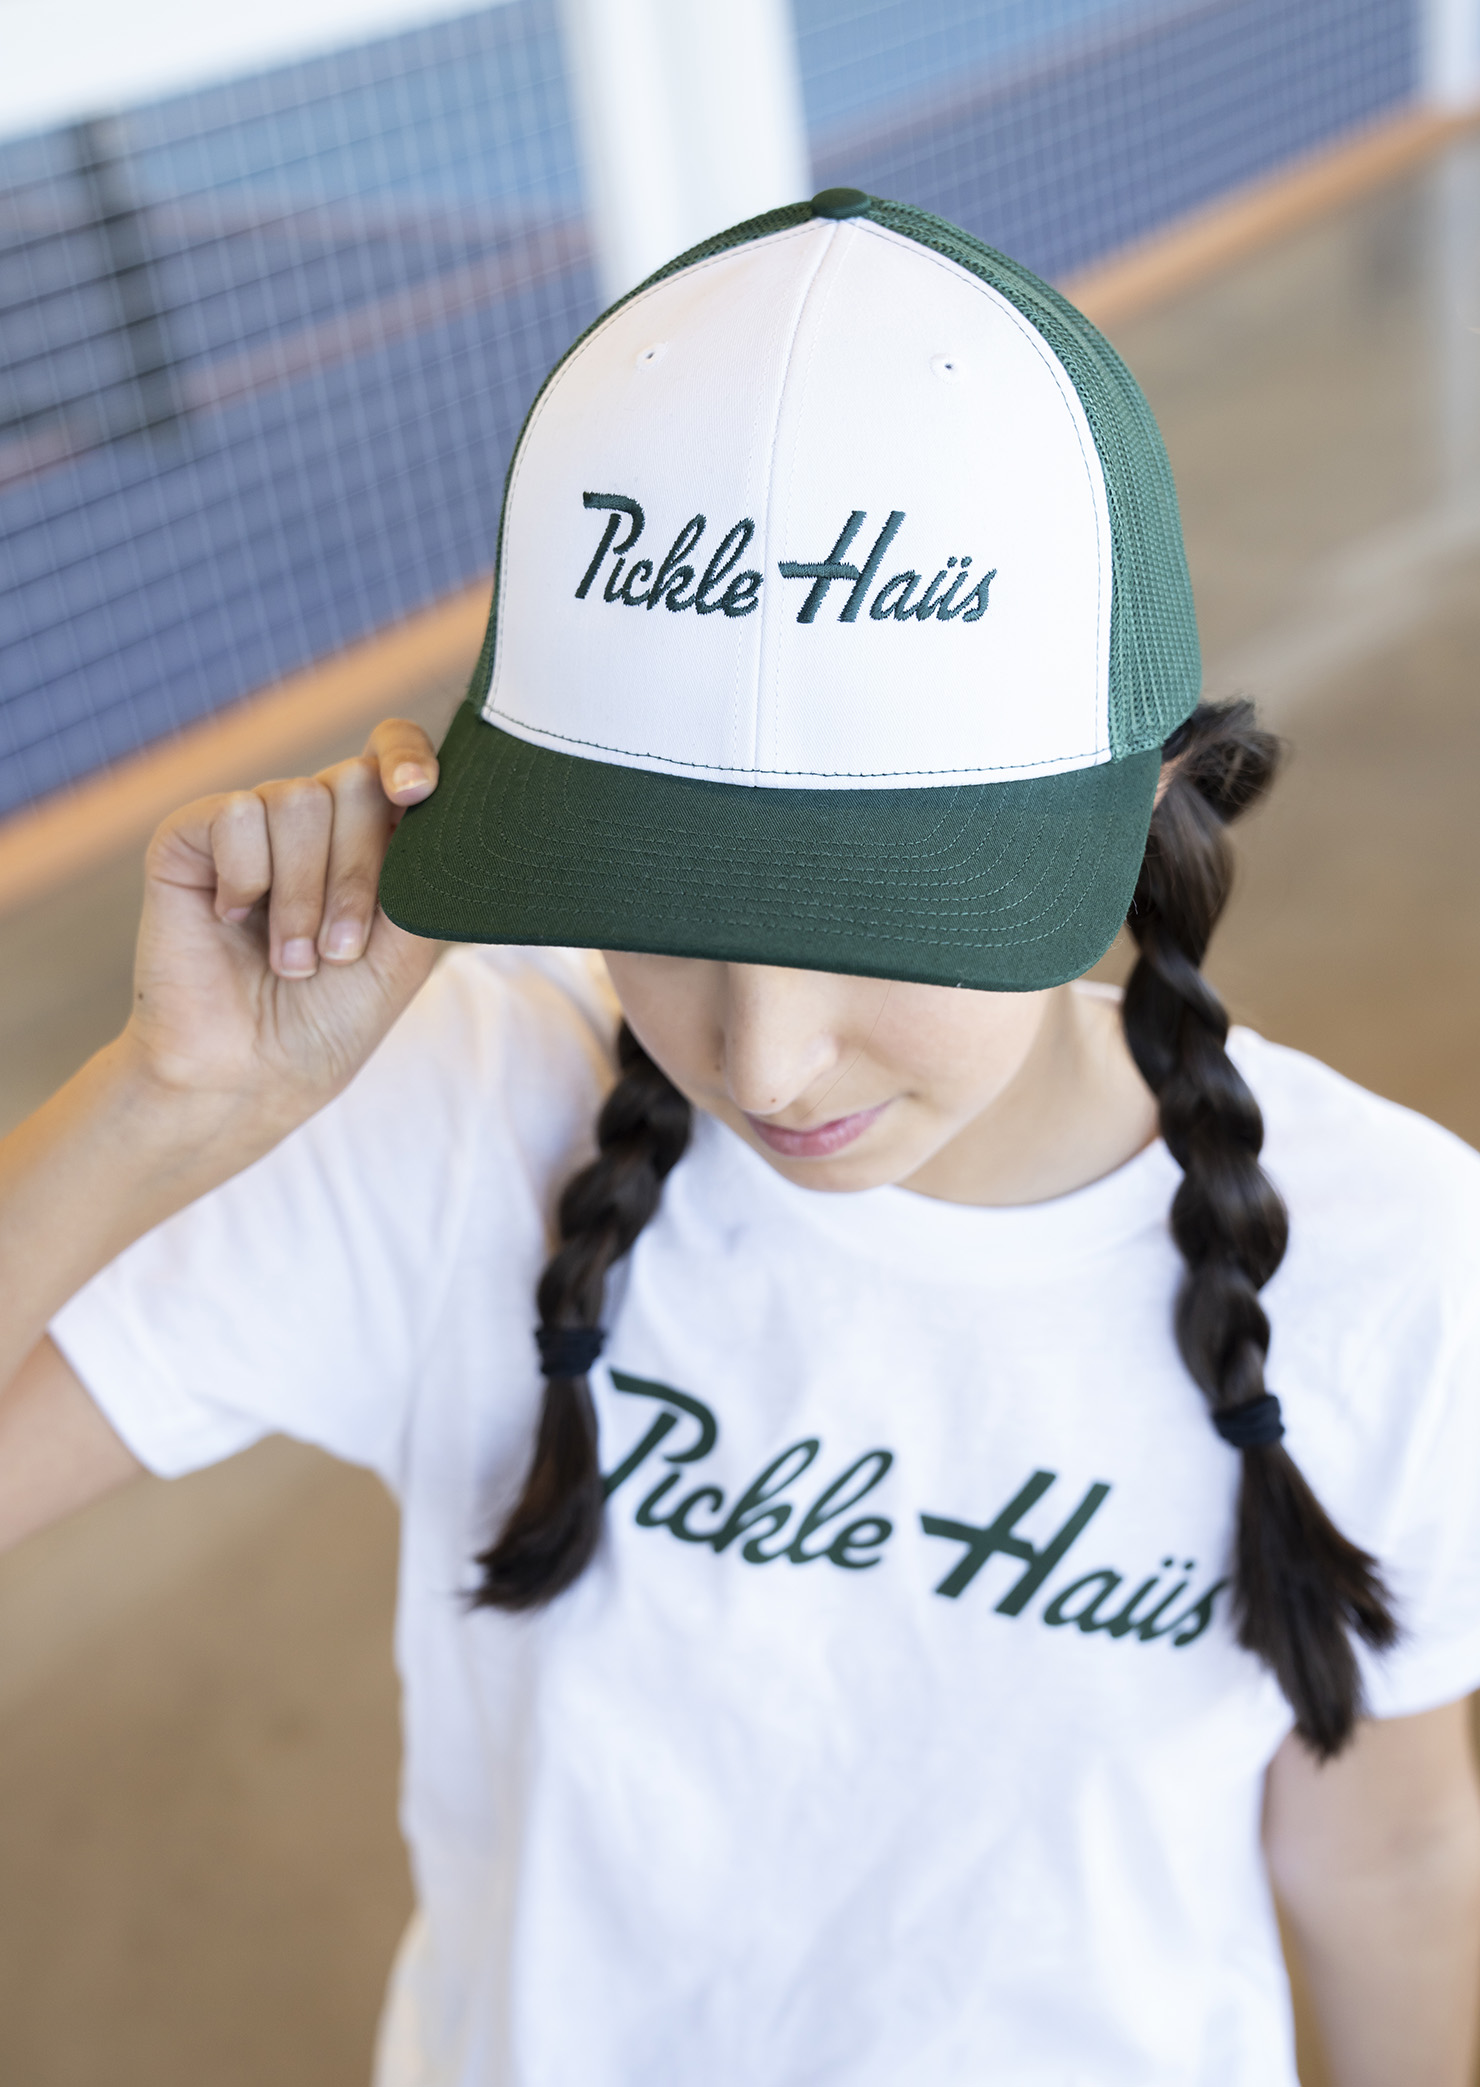 pickle haus white and green hat with green logo